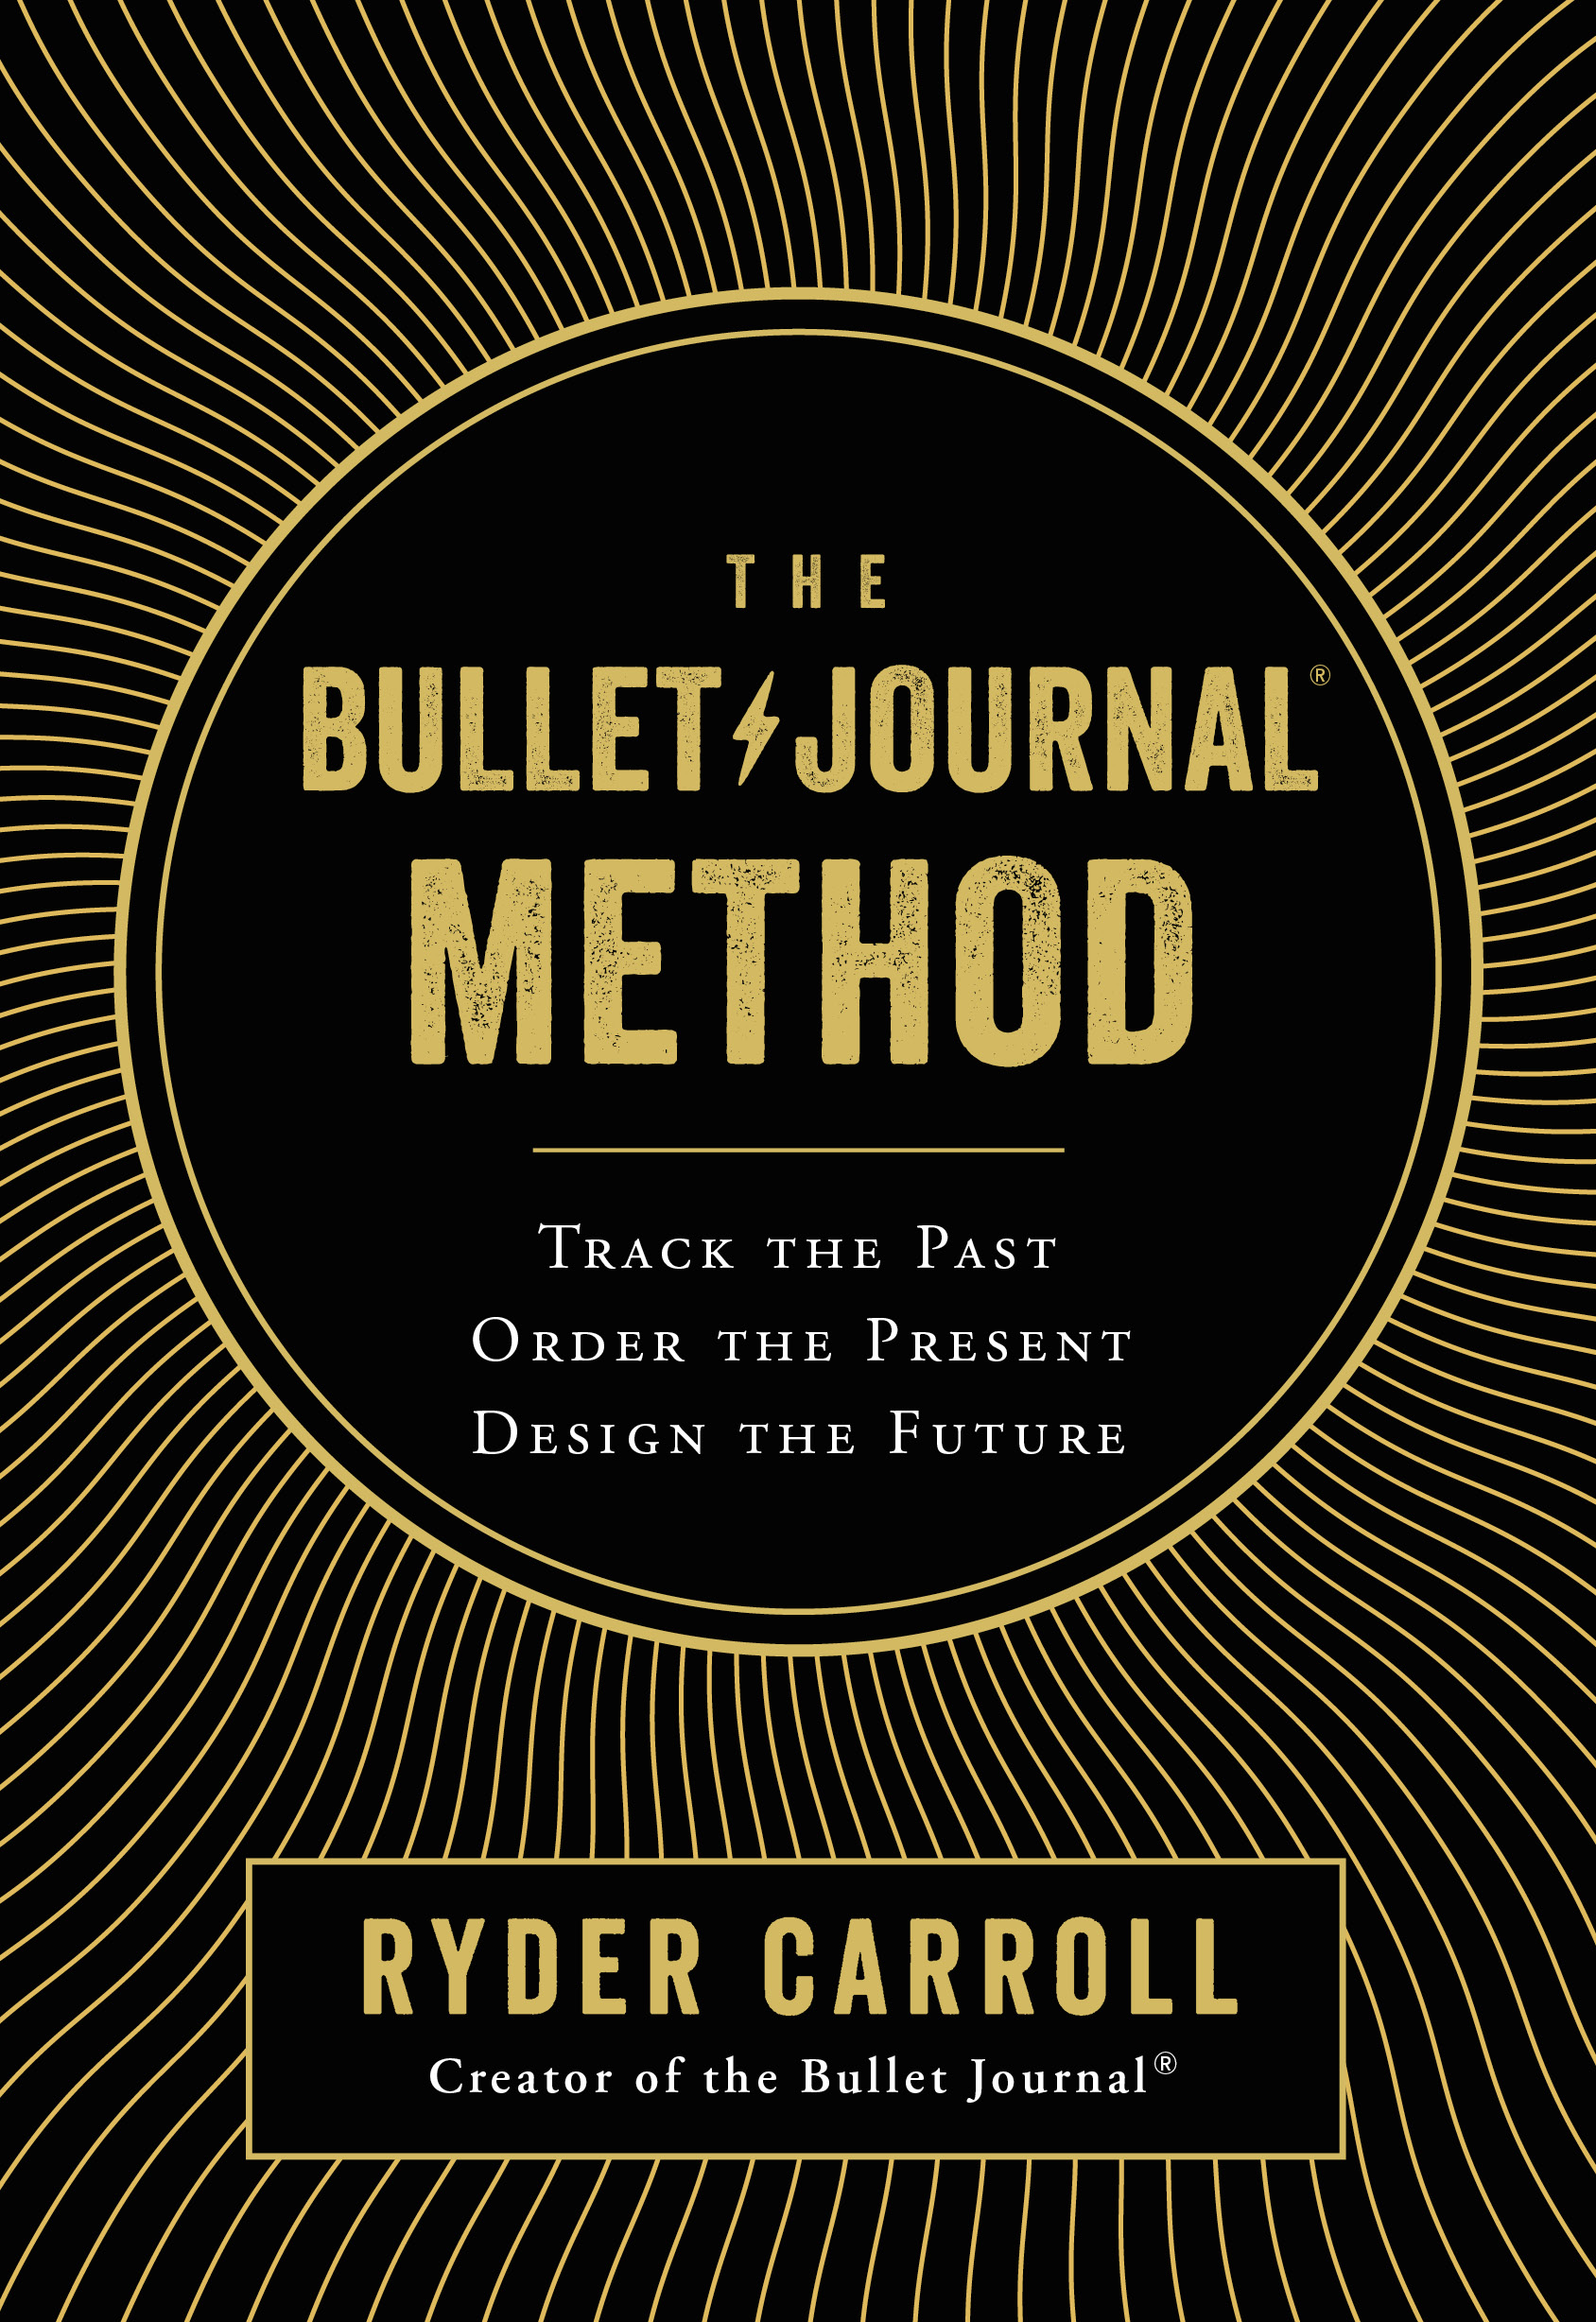 Book Launch: The Bullet Journal Method by Ryder Carroll in conversation w/ Amber Rae